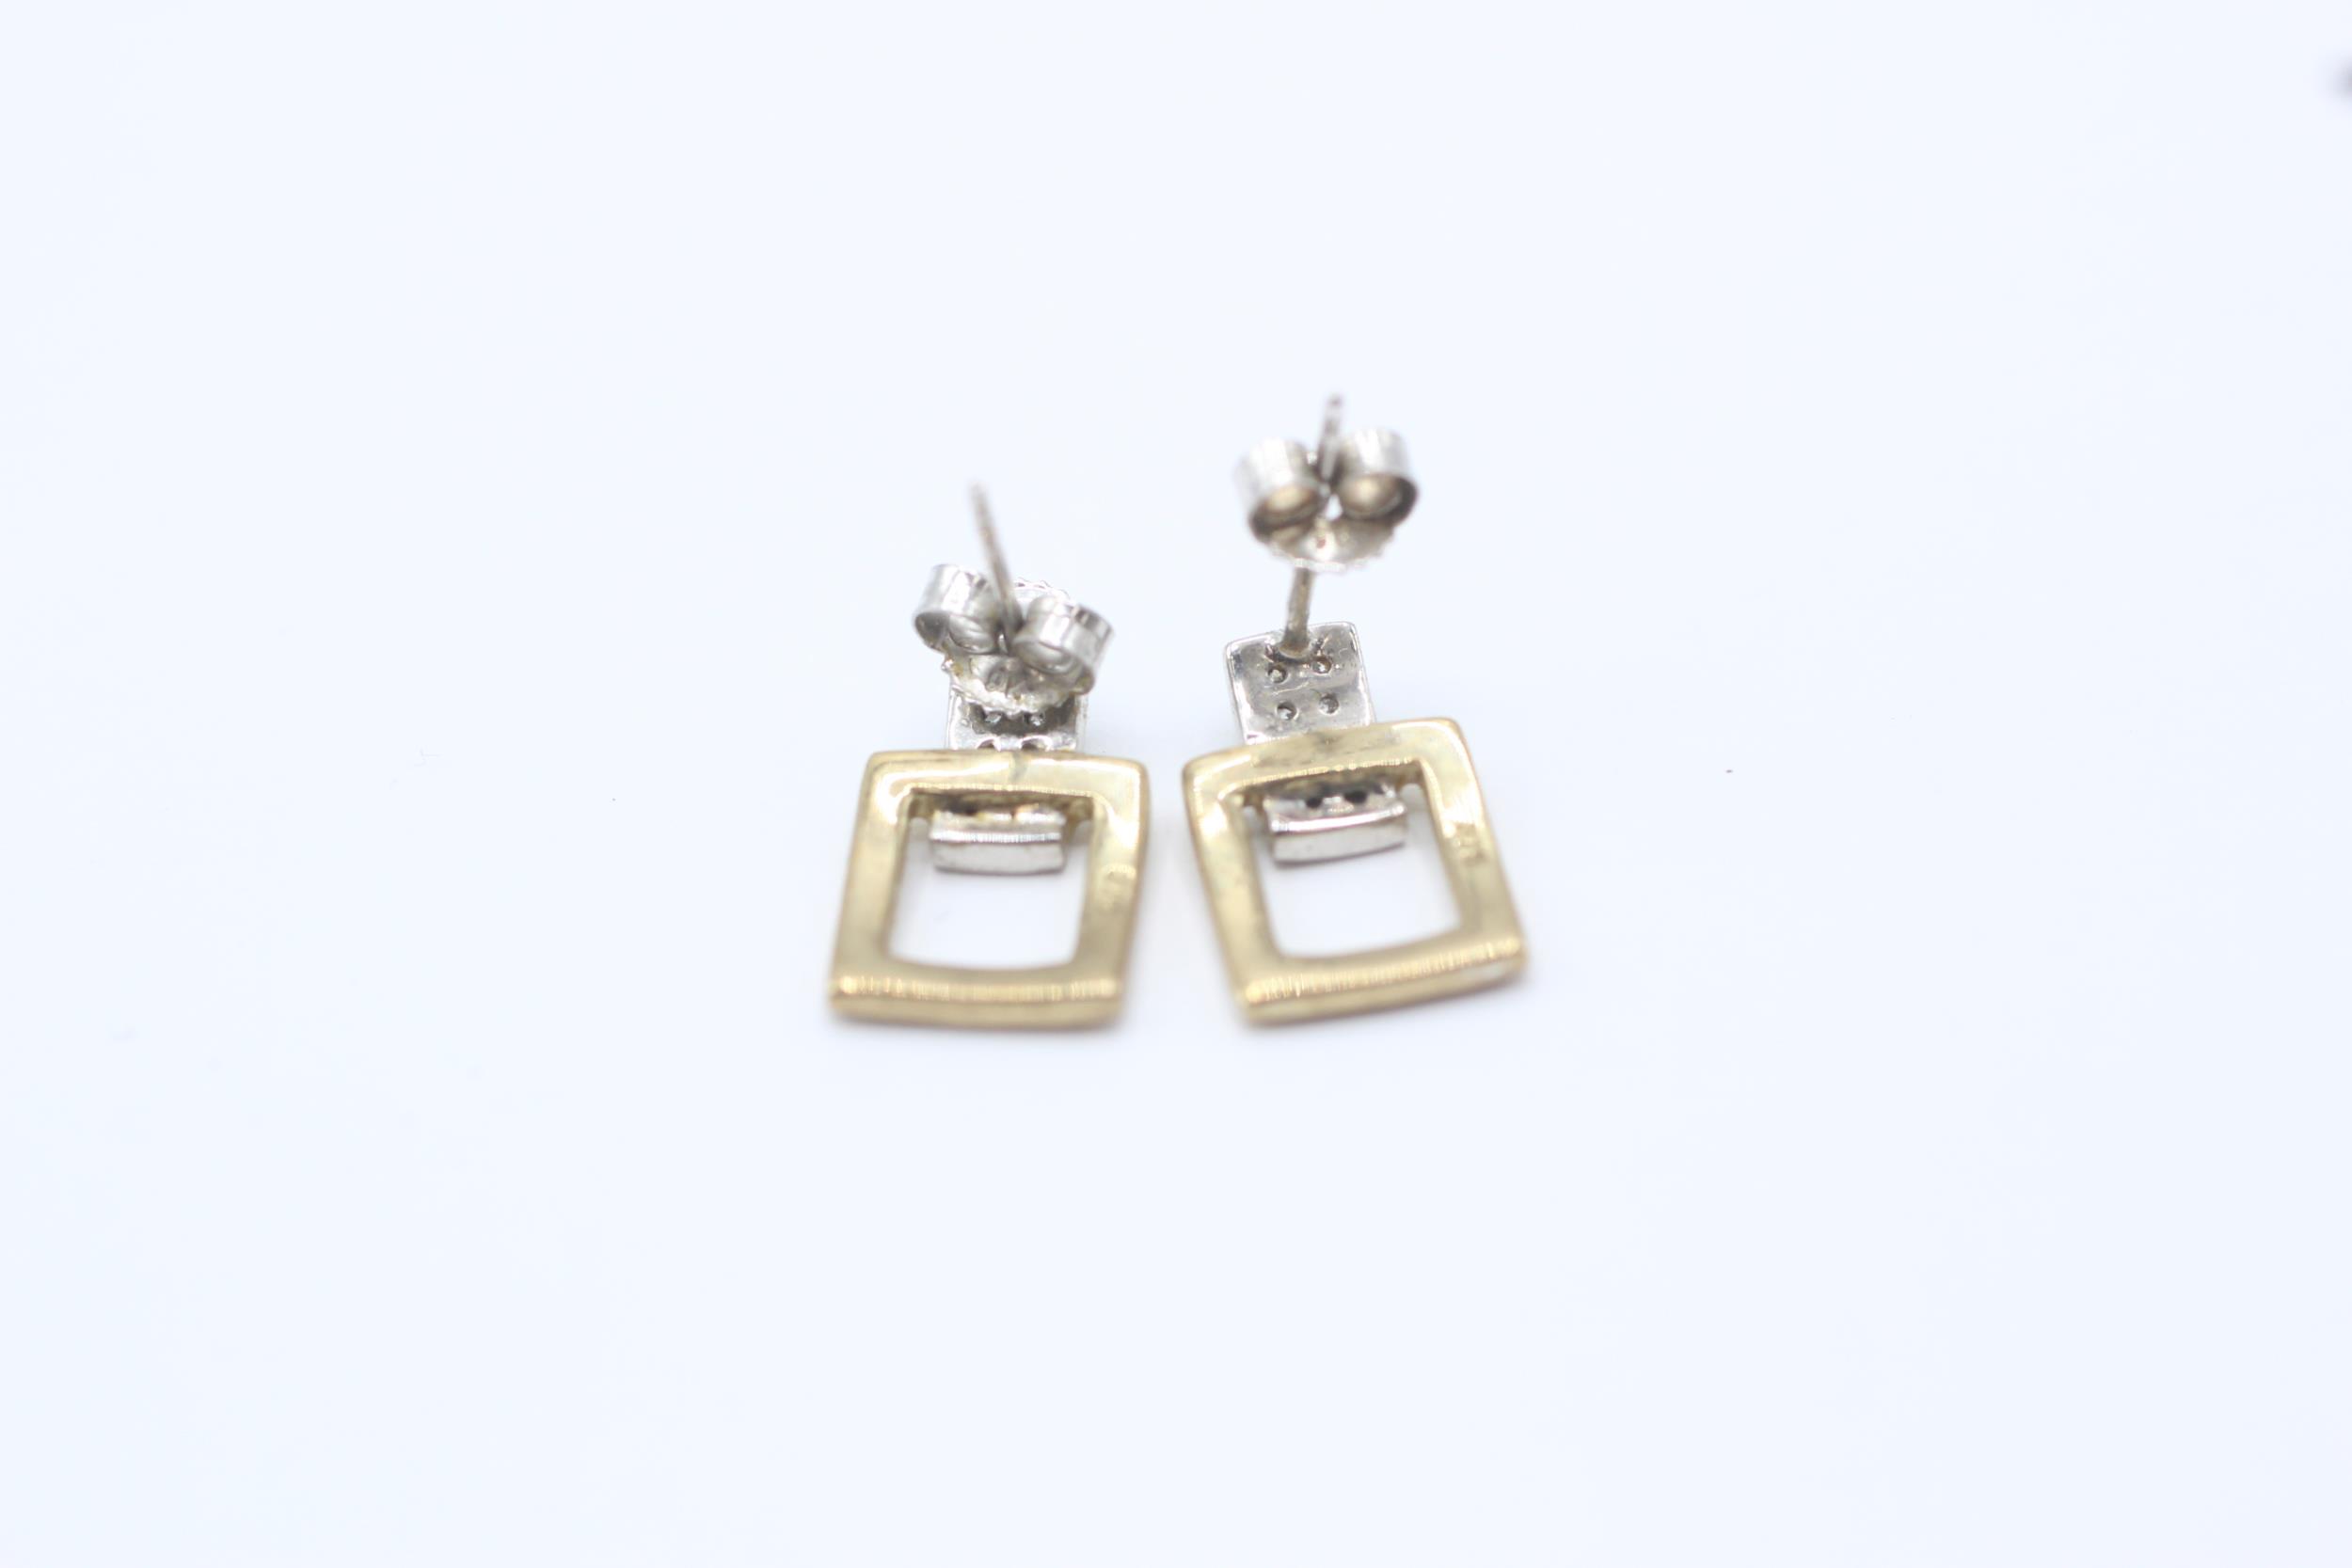 9ct gold diamond drop earrings with scroll backs - 2.1 g - Image 4 of 4